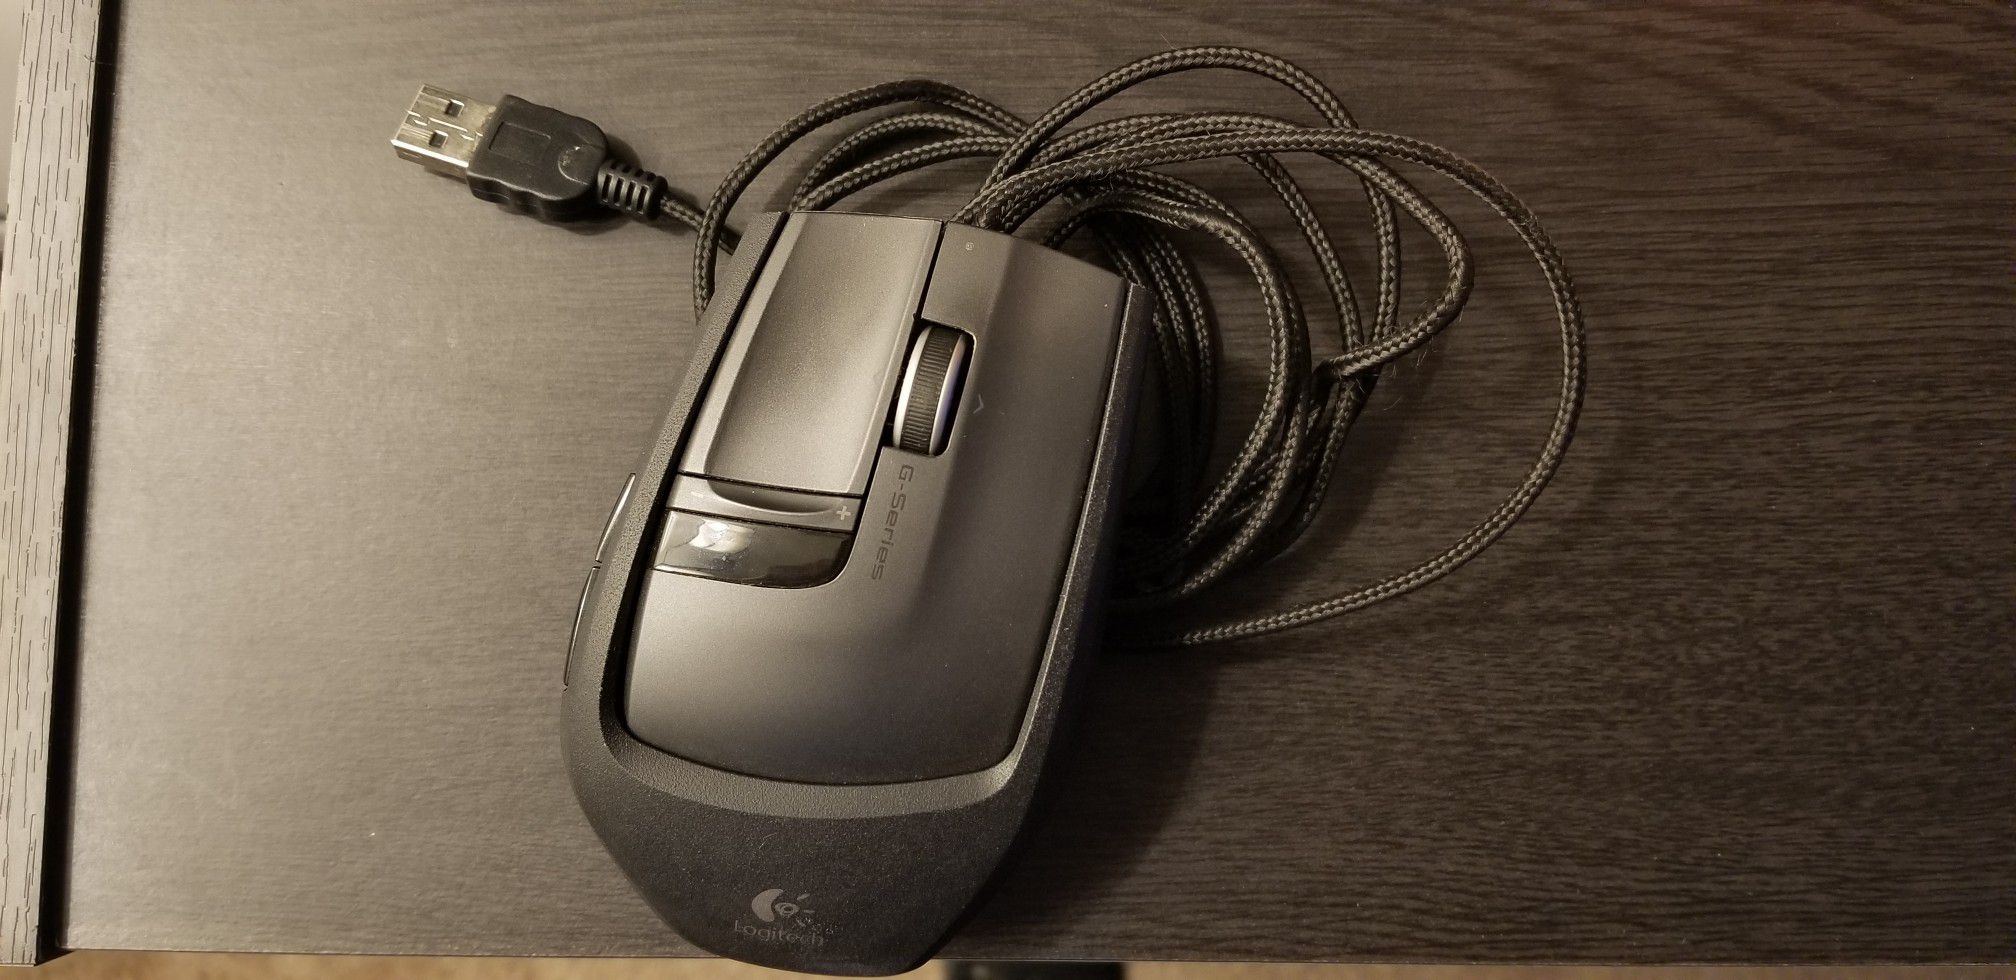 Logitech G9X Gaming Mouse. Discontinued Sale New CT - OfferUp